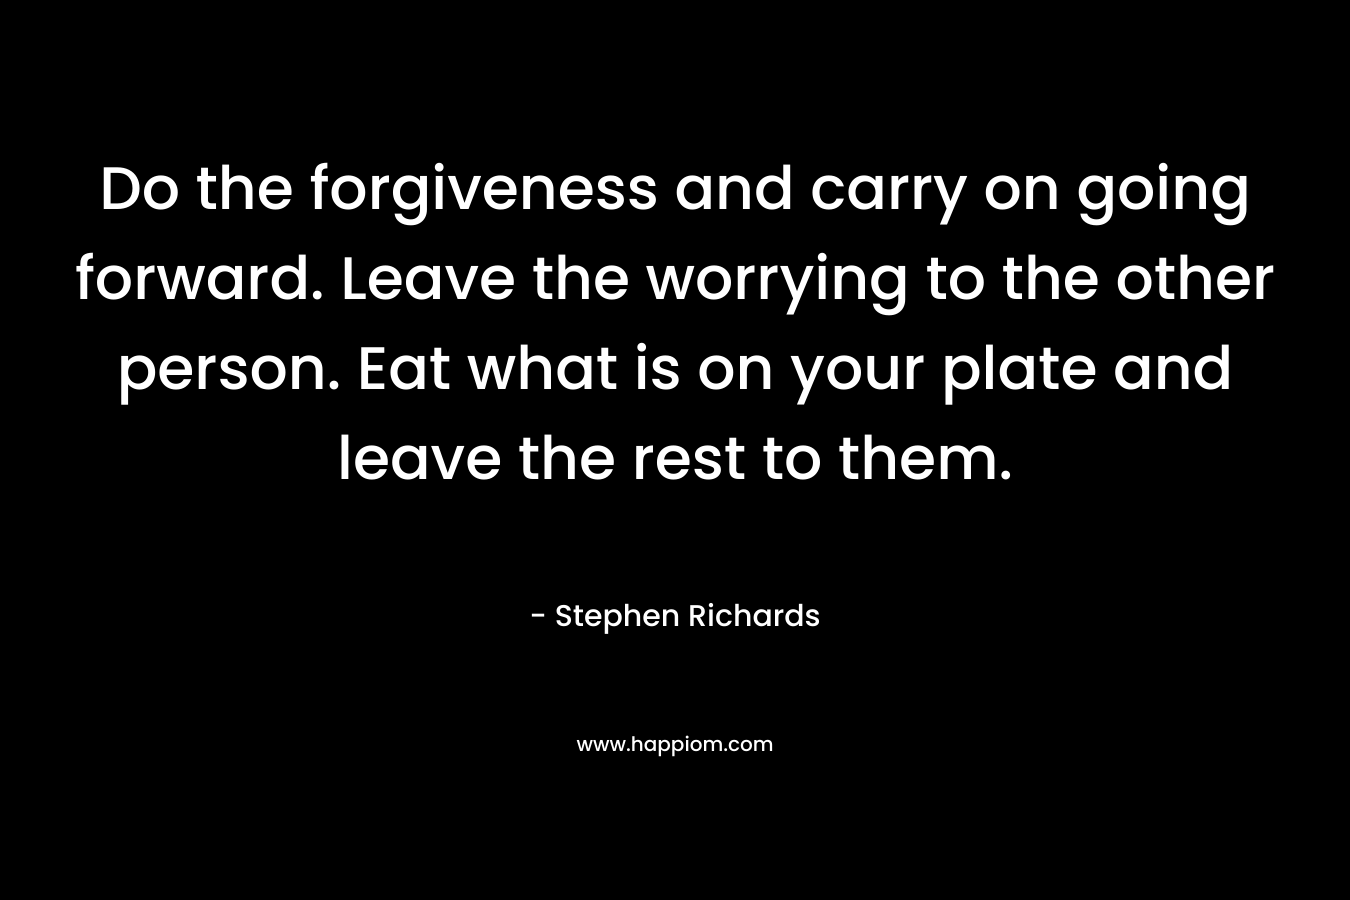 Do the forgiveness and carry on going forward. Leave the worrying to the other person. Eat what is on your plate and leave the rest to them.